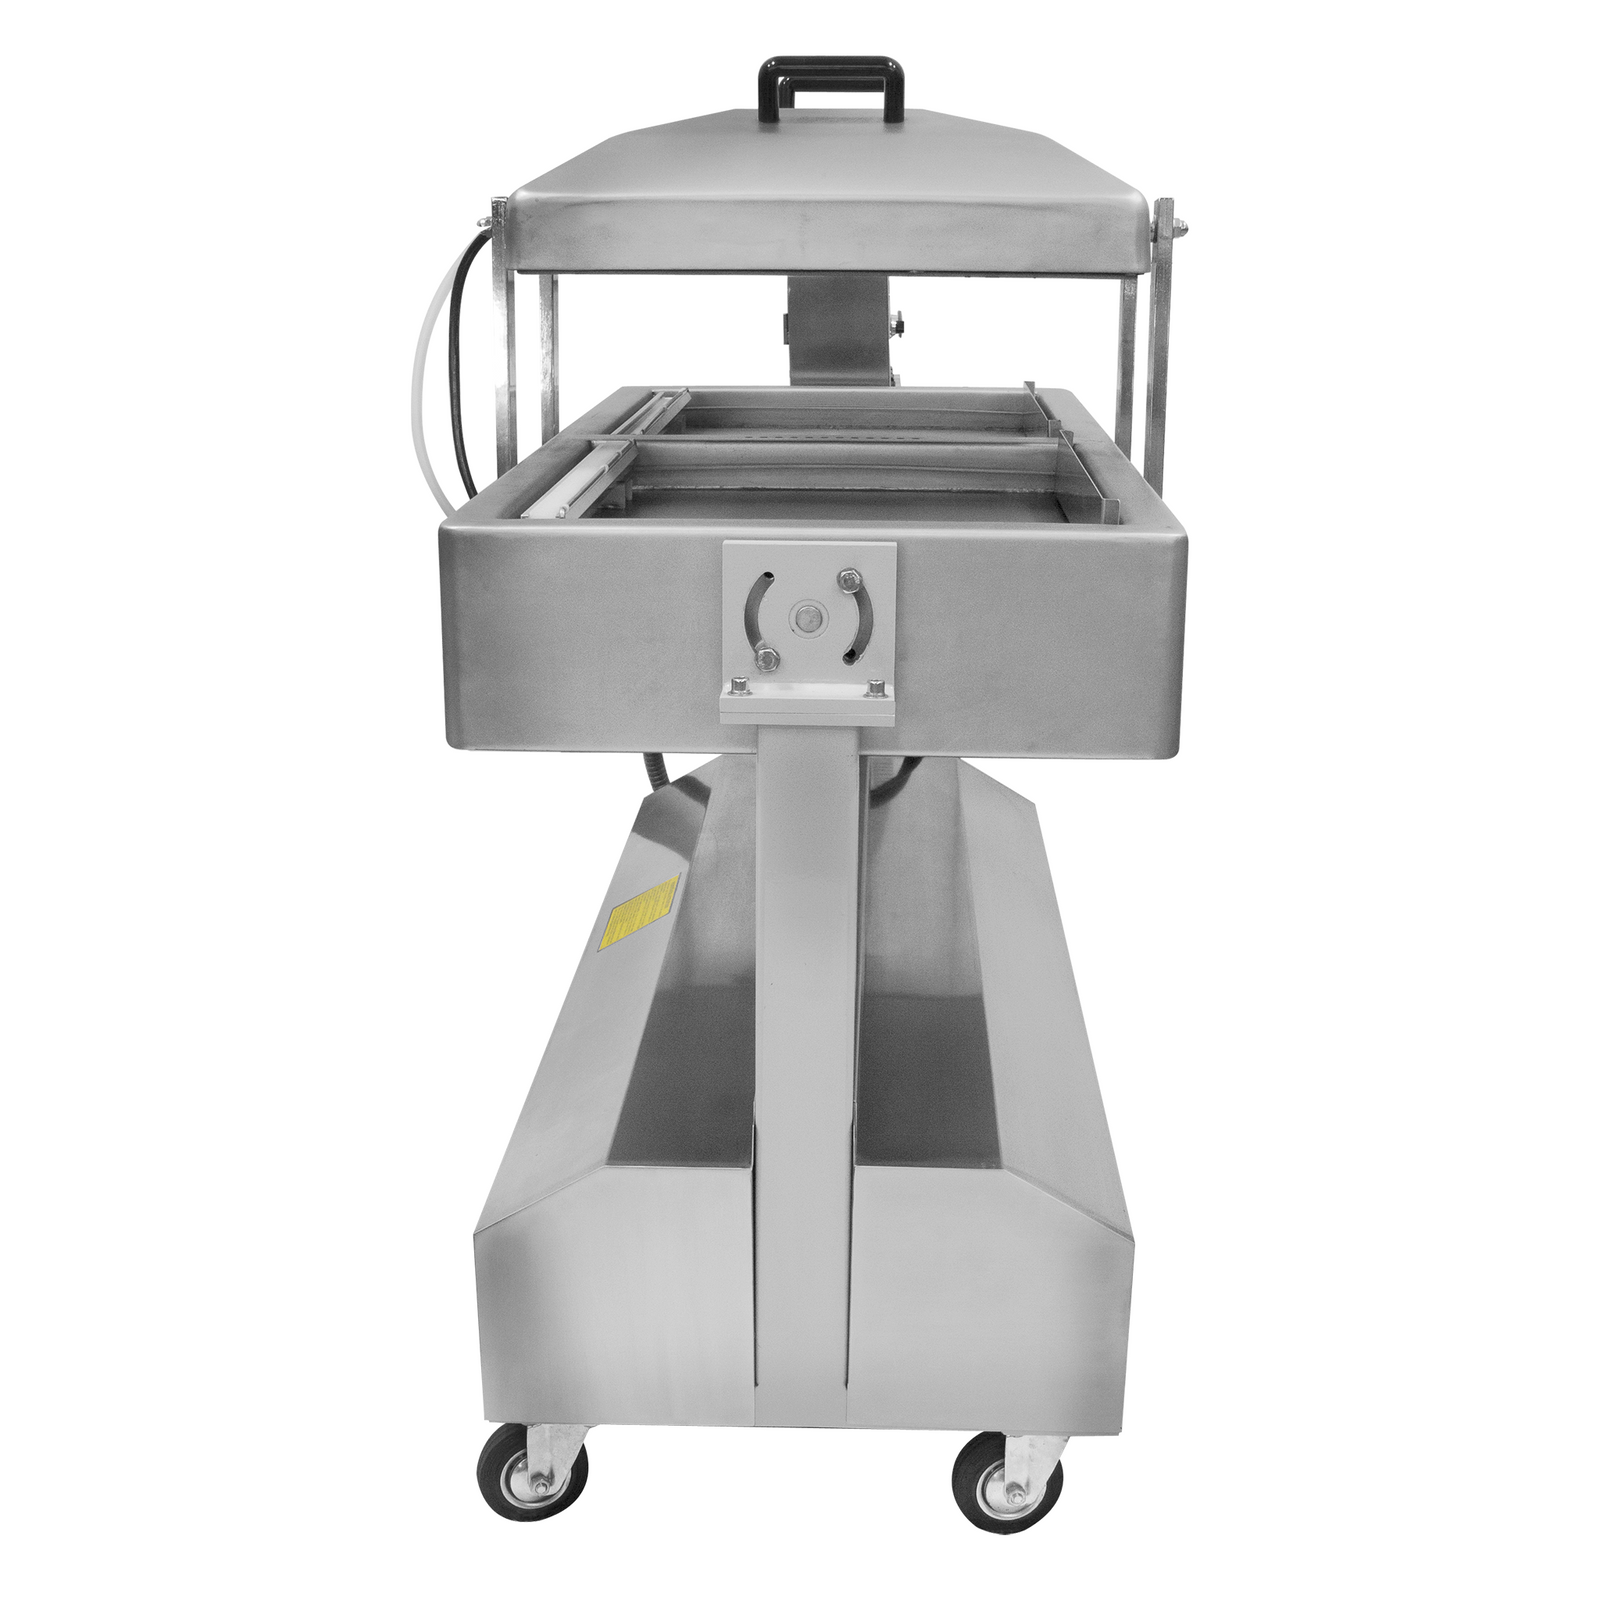 Commercial Tabletop Vacuum Sealing Machine with Dual Sealing Bars by JORES Technologies